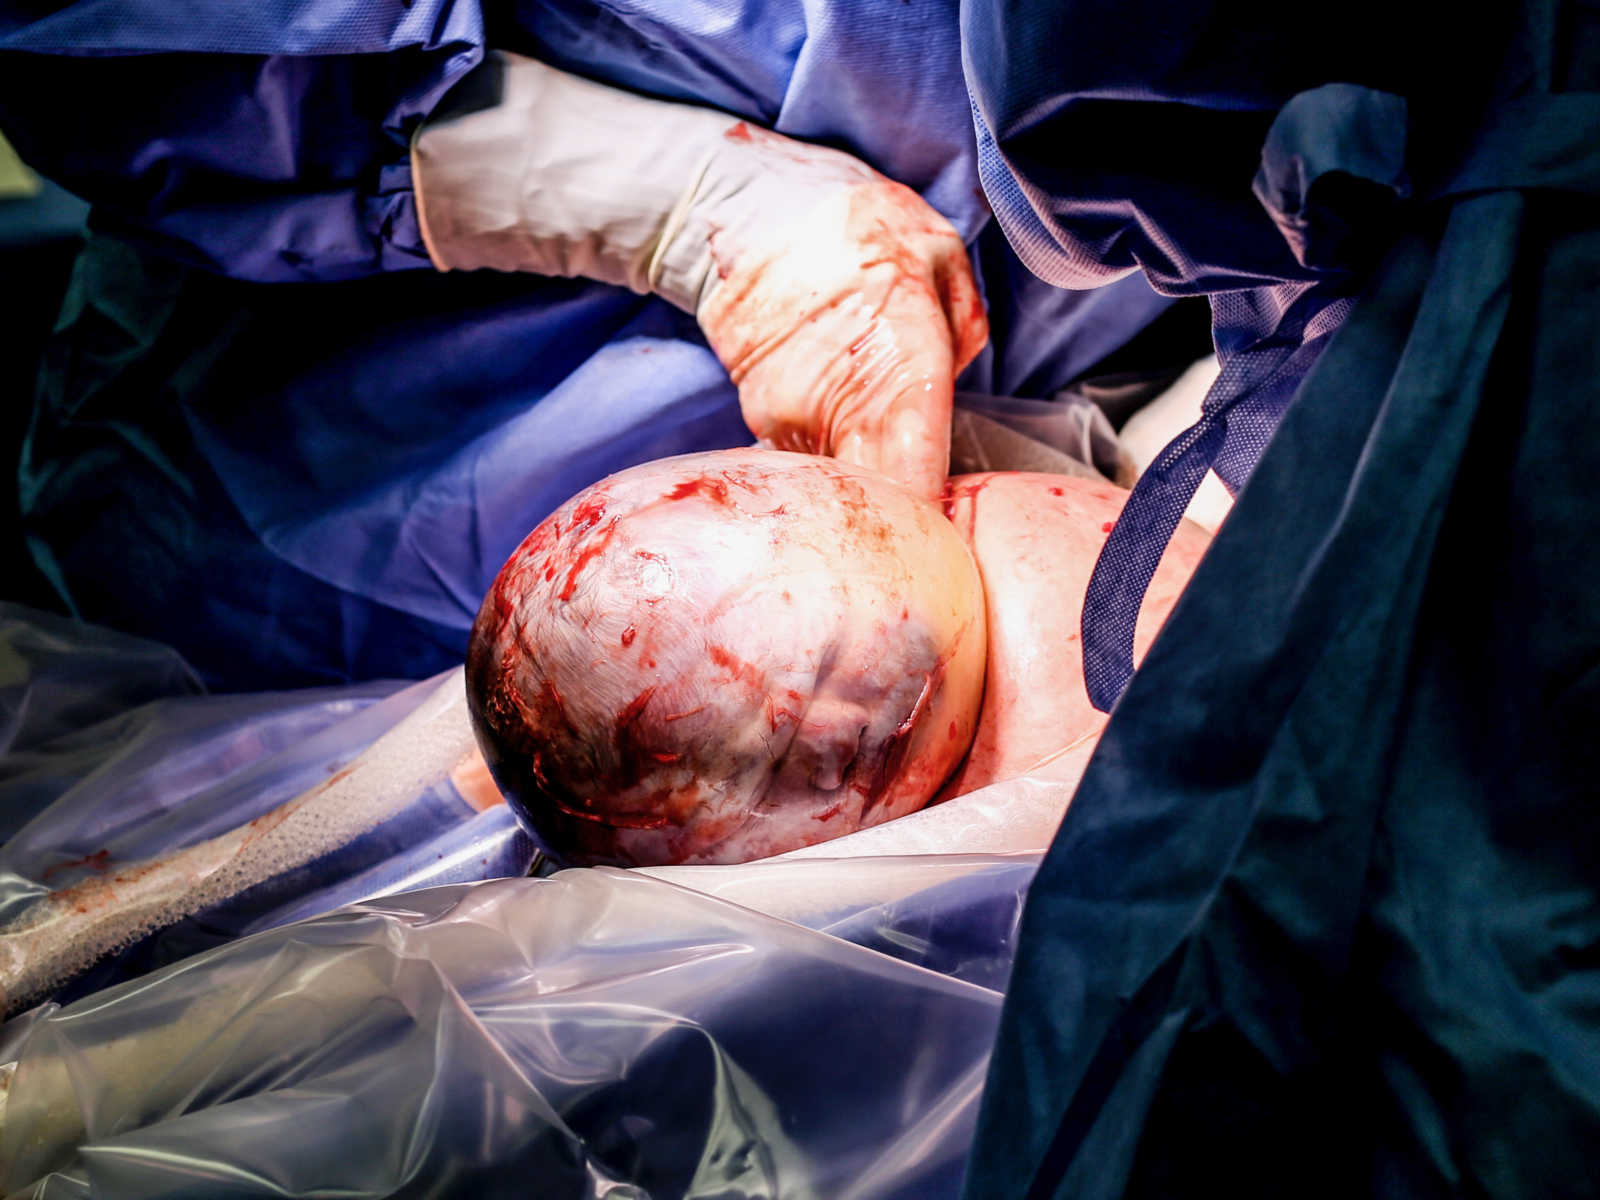 Close up of OBGYN touching newborn whose head is still in amniotic sac